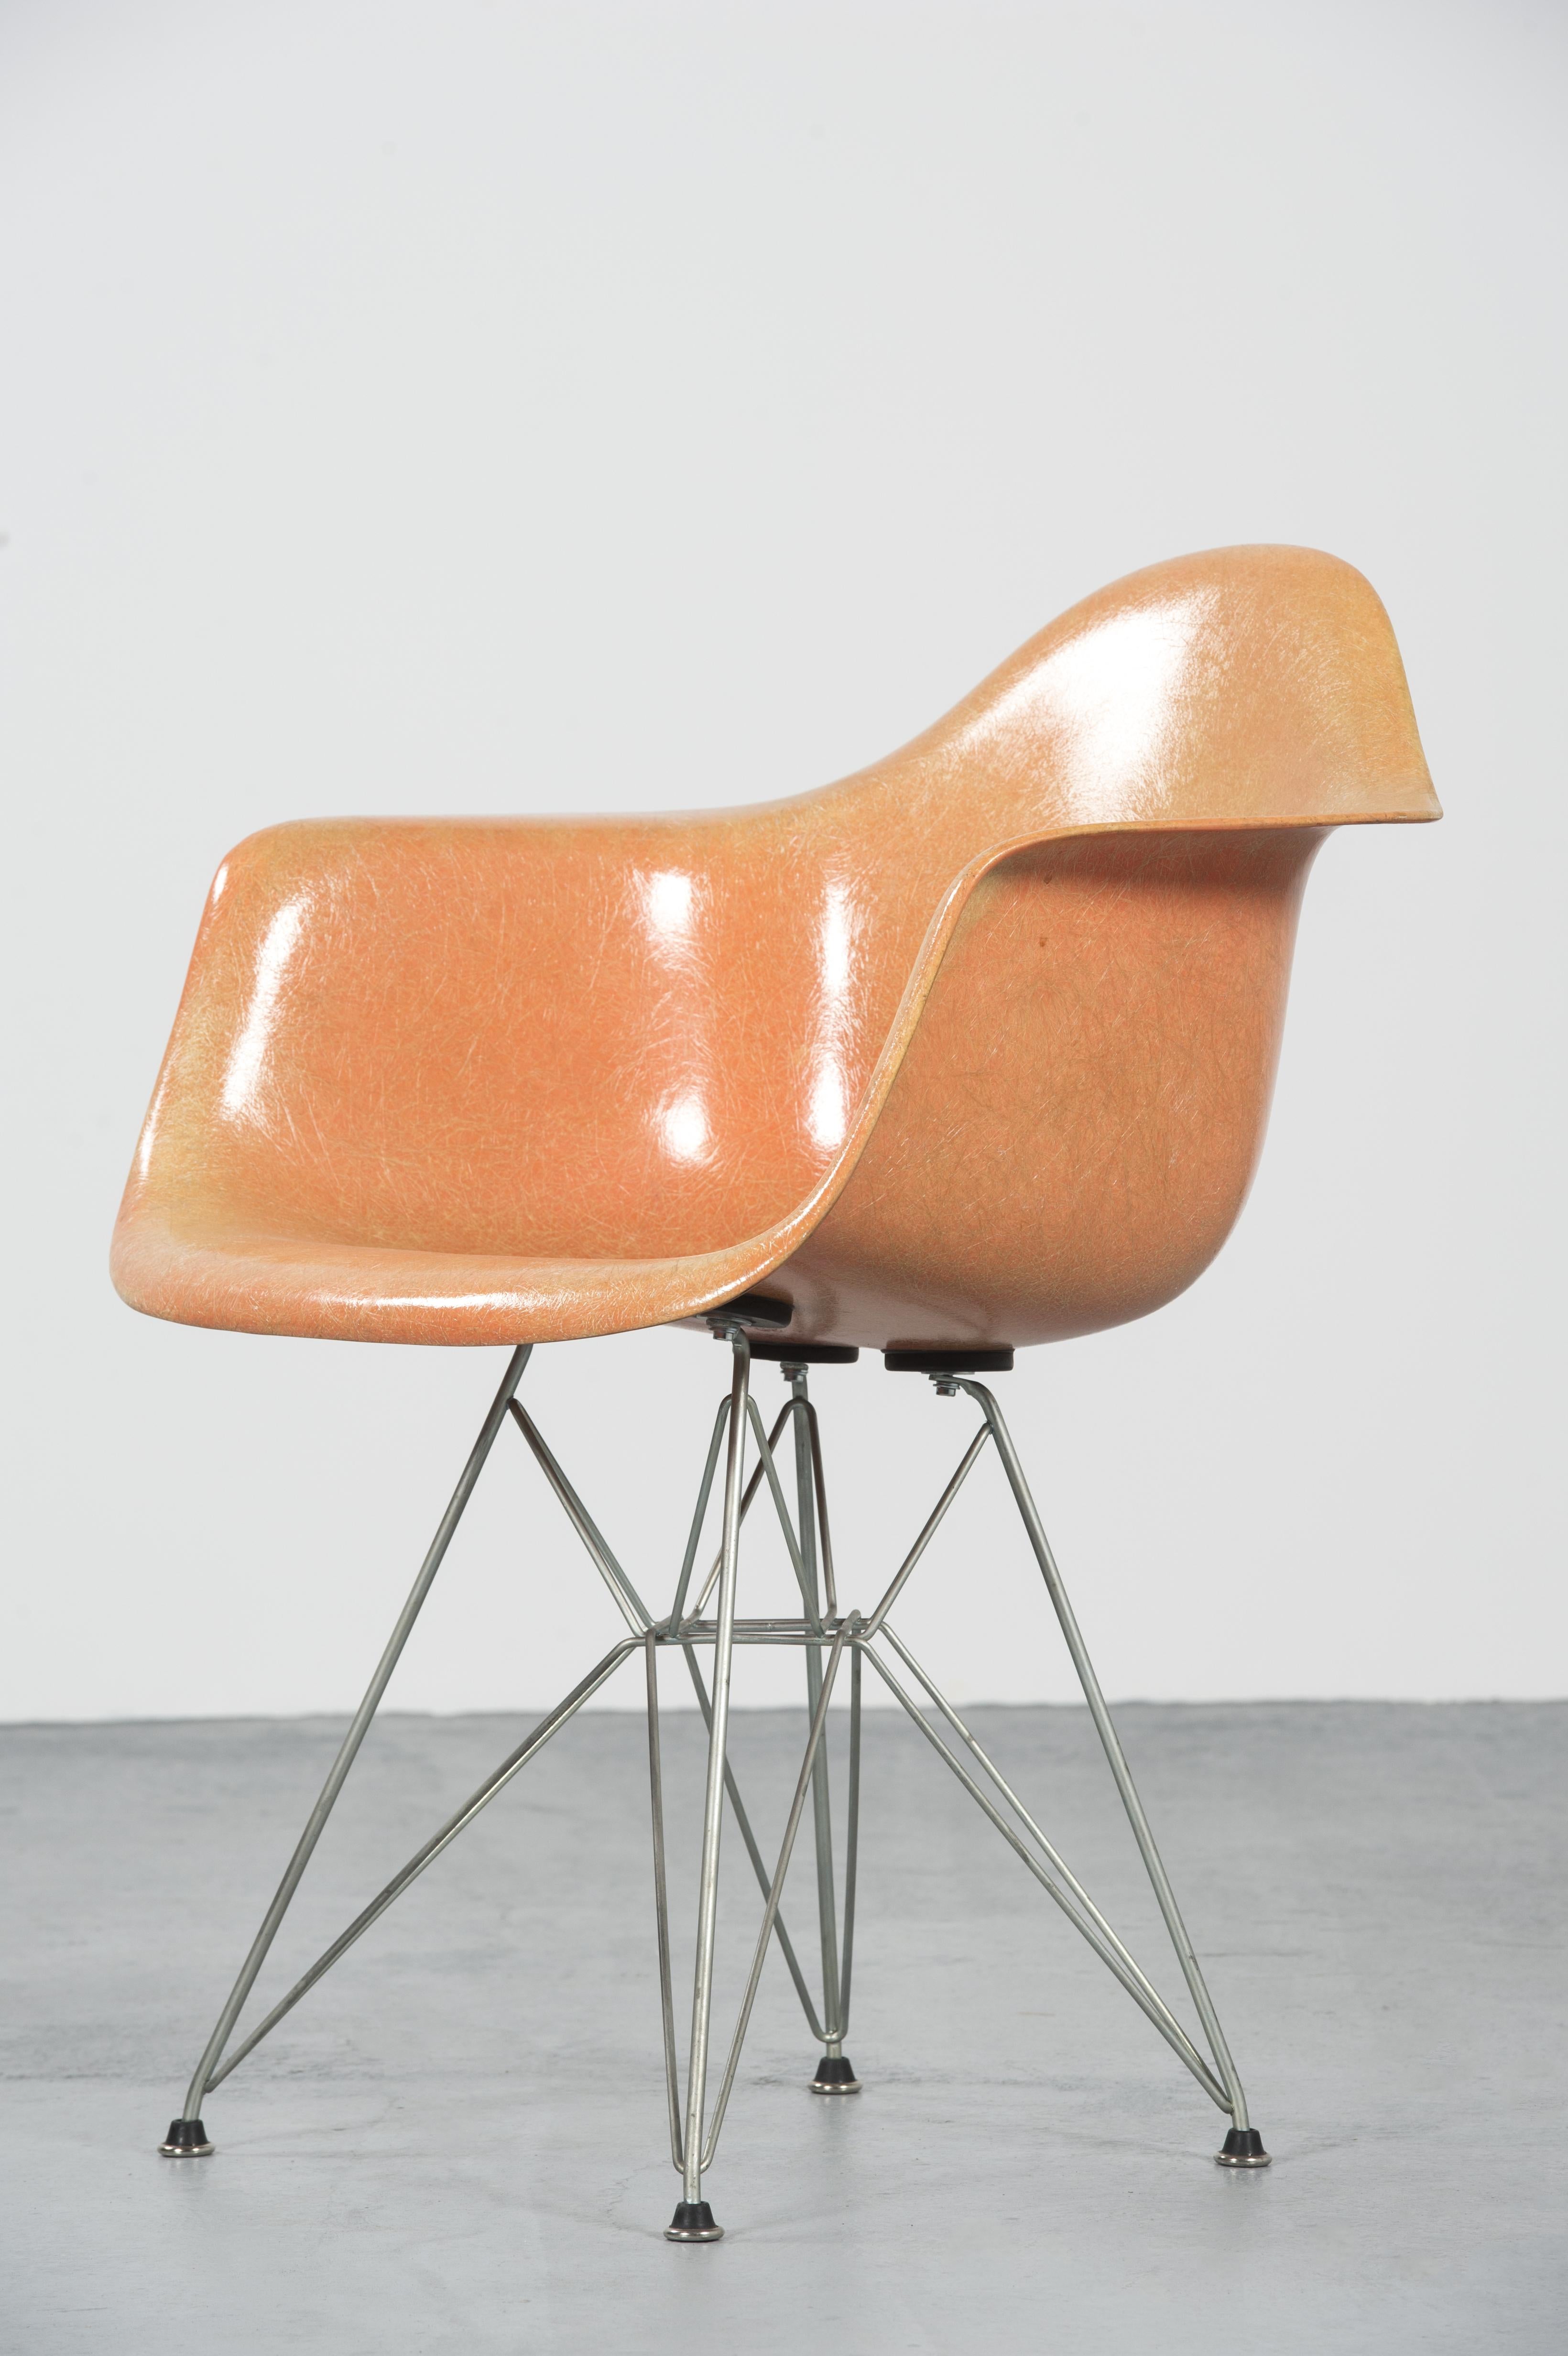 Charles & Ray Eames Rope Edge Zenith Eiffel, 1949, USA

Rare early roped edge Eames chair made by Zenith plastics/ Herman Miller in great condition. The chair retains the original label although it is worn.

In 1949, the Eames contacted the firm